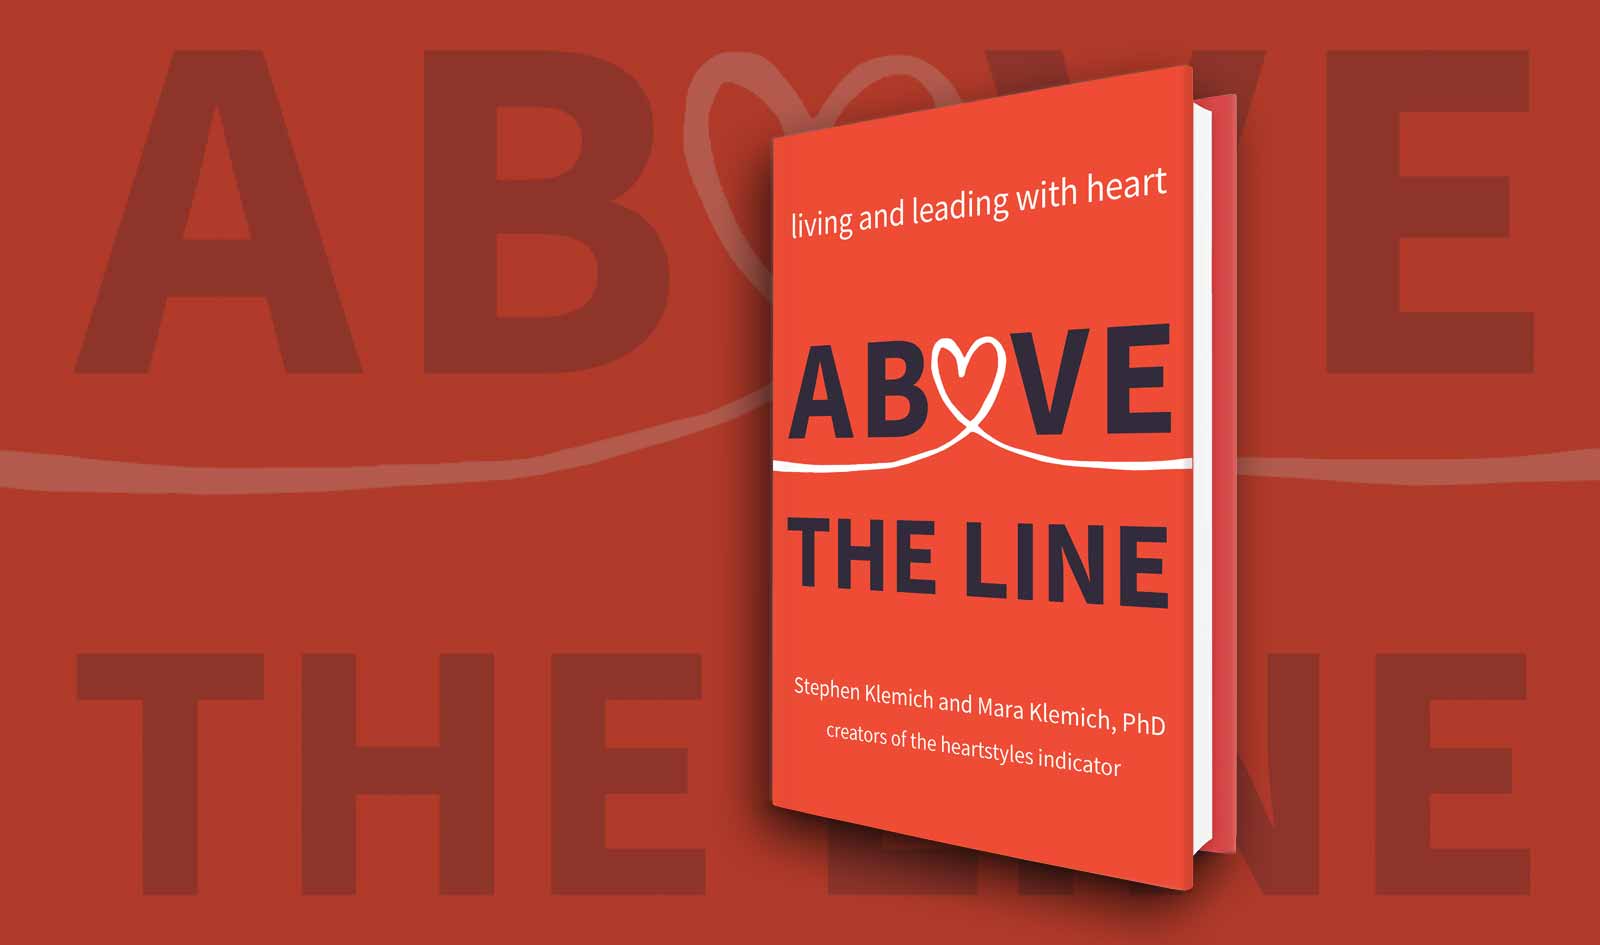 Heartstyles Features Book About Living And Leading With Heart